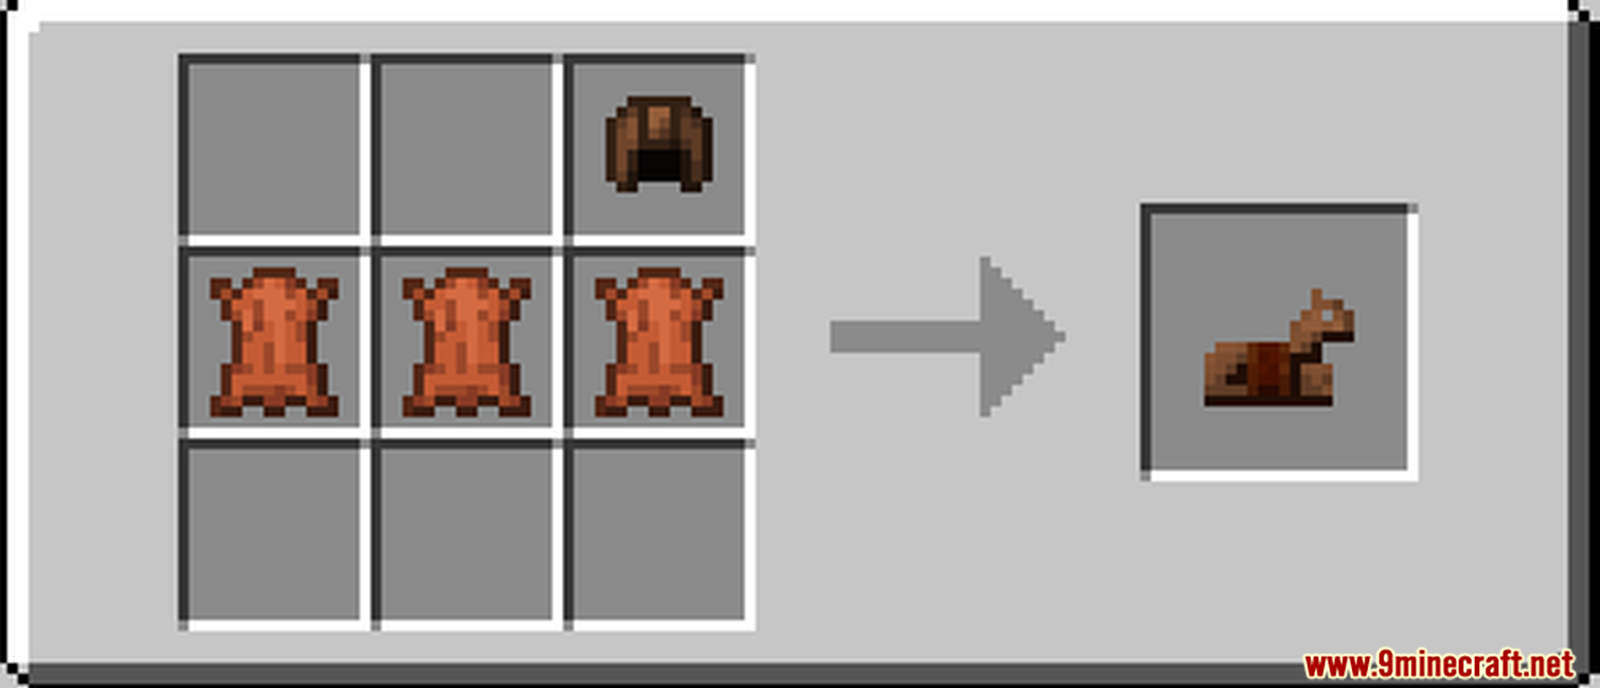 Horse Armor Crafting Data Pack (1.19.3, 1.18.2) - Craftable Horse Armors 2